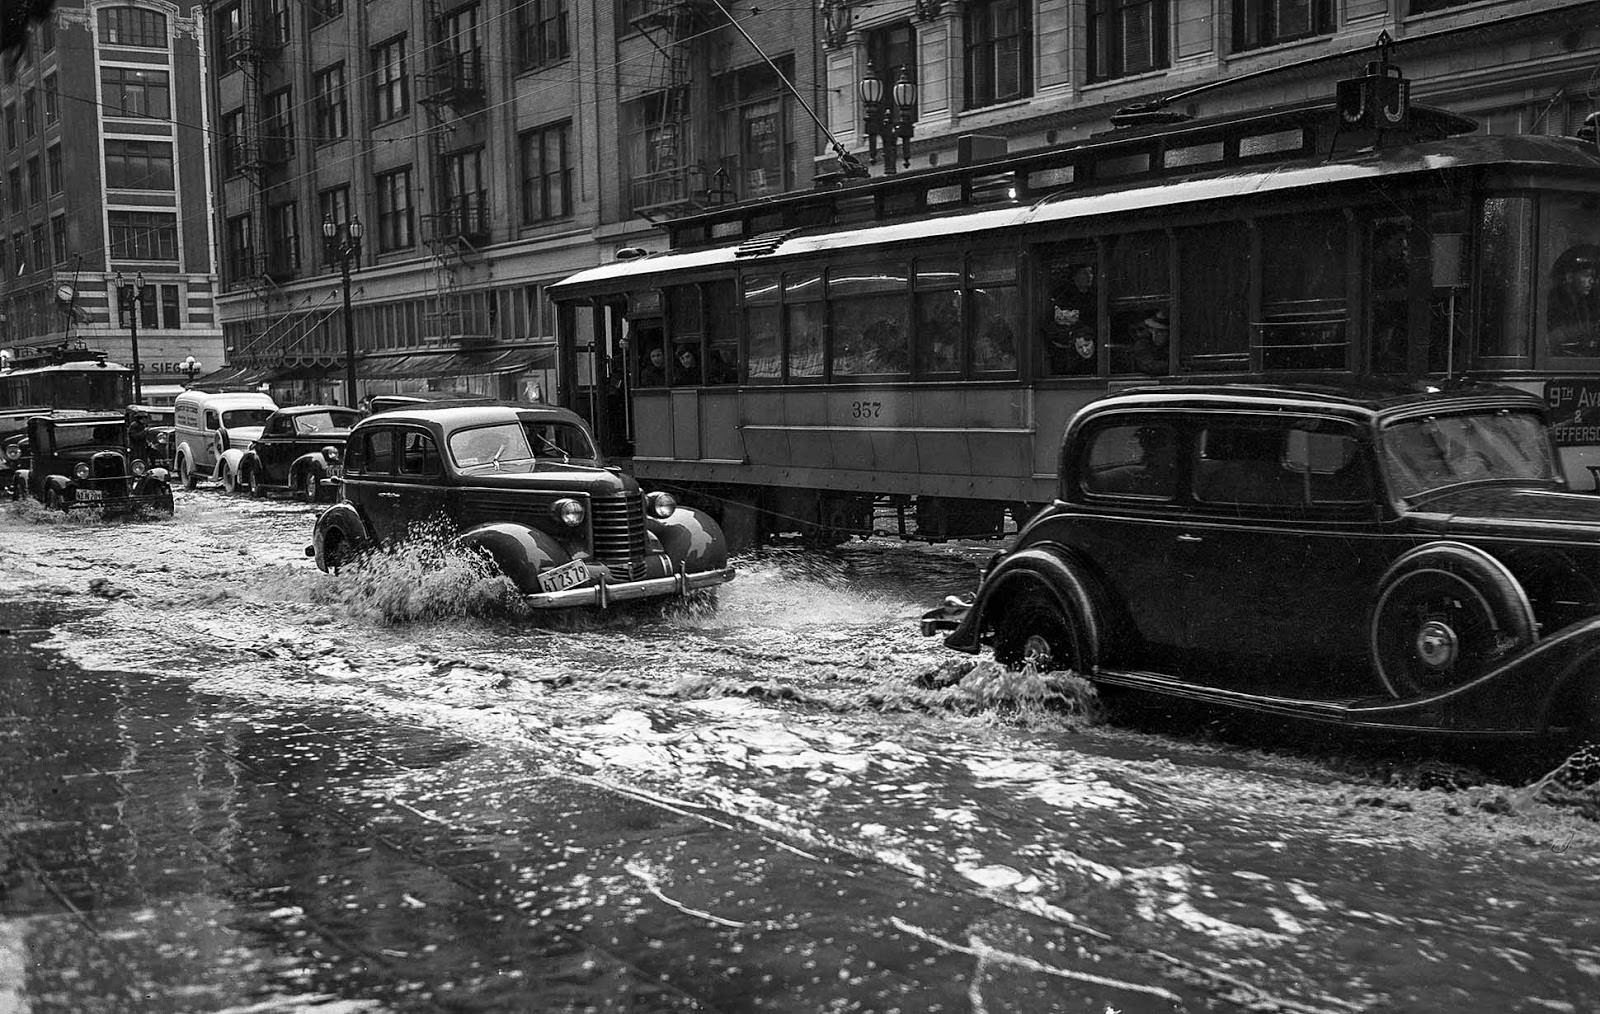 Drains could not keep up with rain filling streets in downtown Los Angeles, 1938